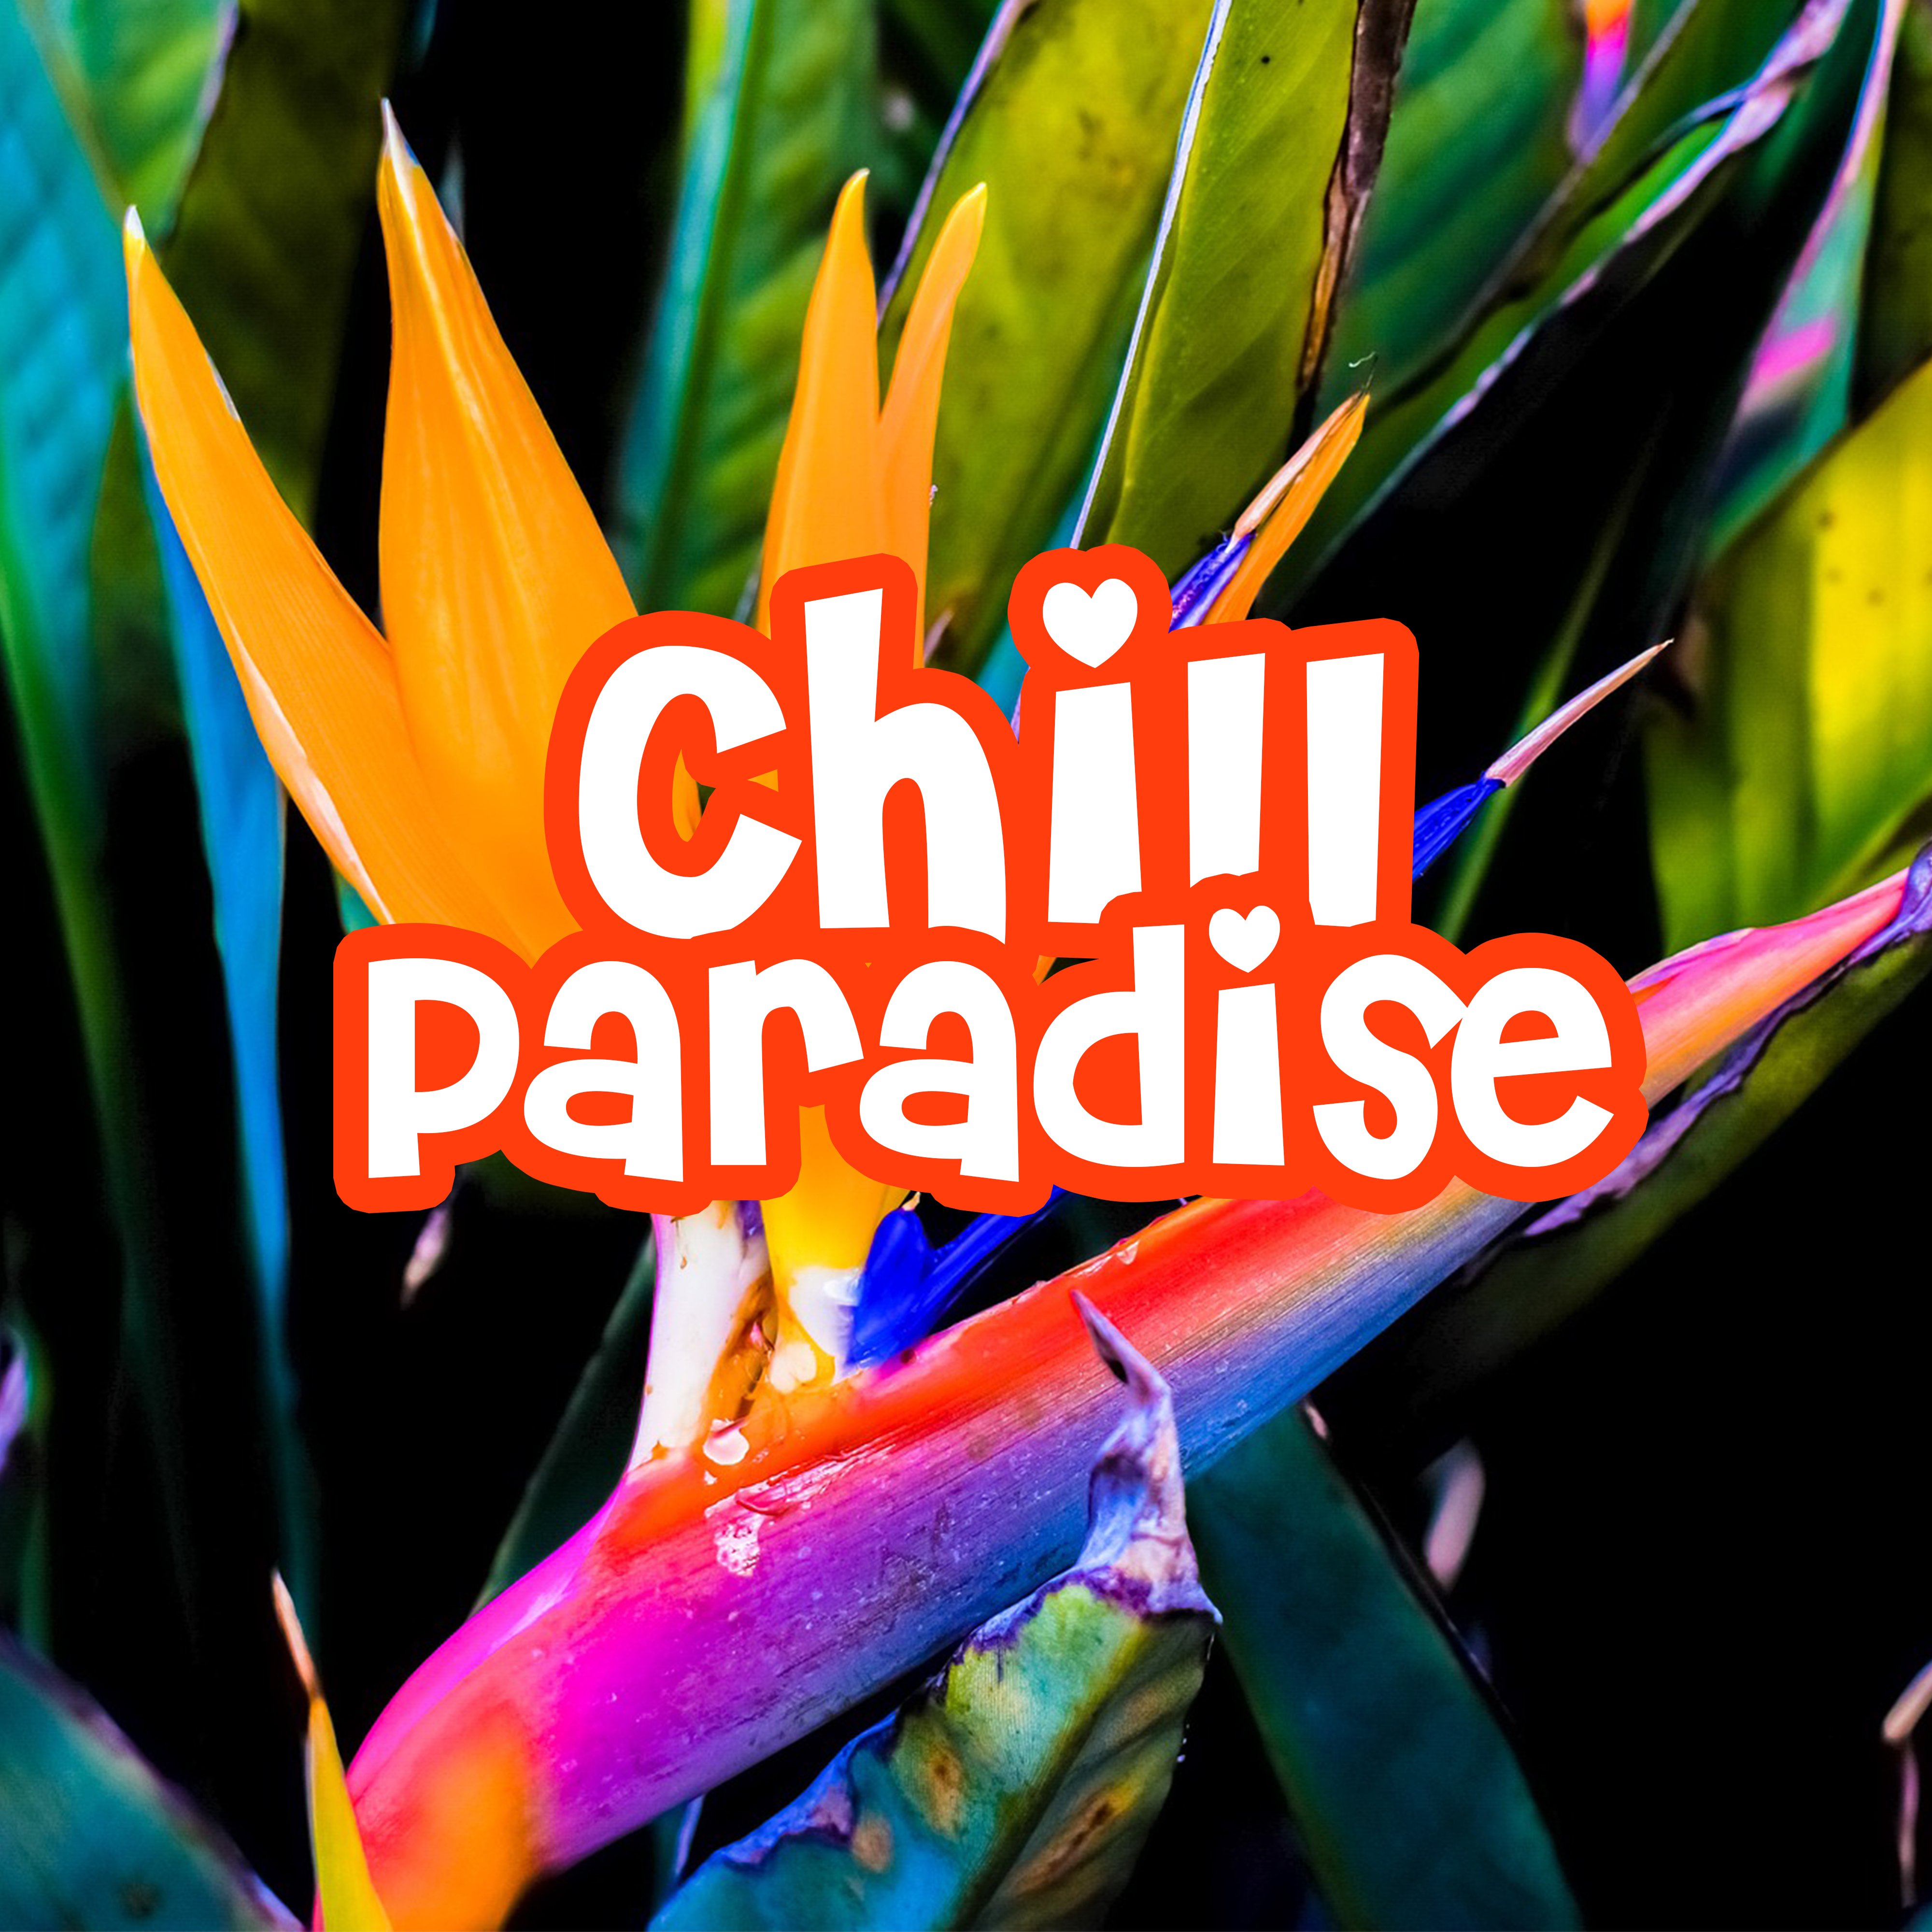 Chill Paradise – Peaceful Waves, Beach Chill, Relax, Summer Vibes, Ocean Dreams, Soft Music, Sounds of Sea, Bar Chill Out